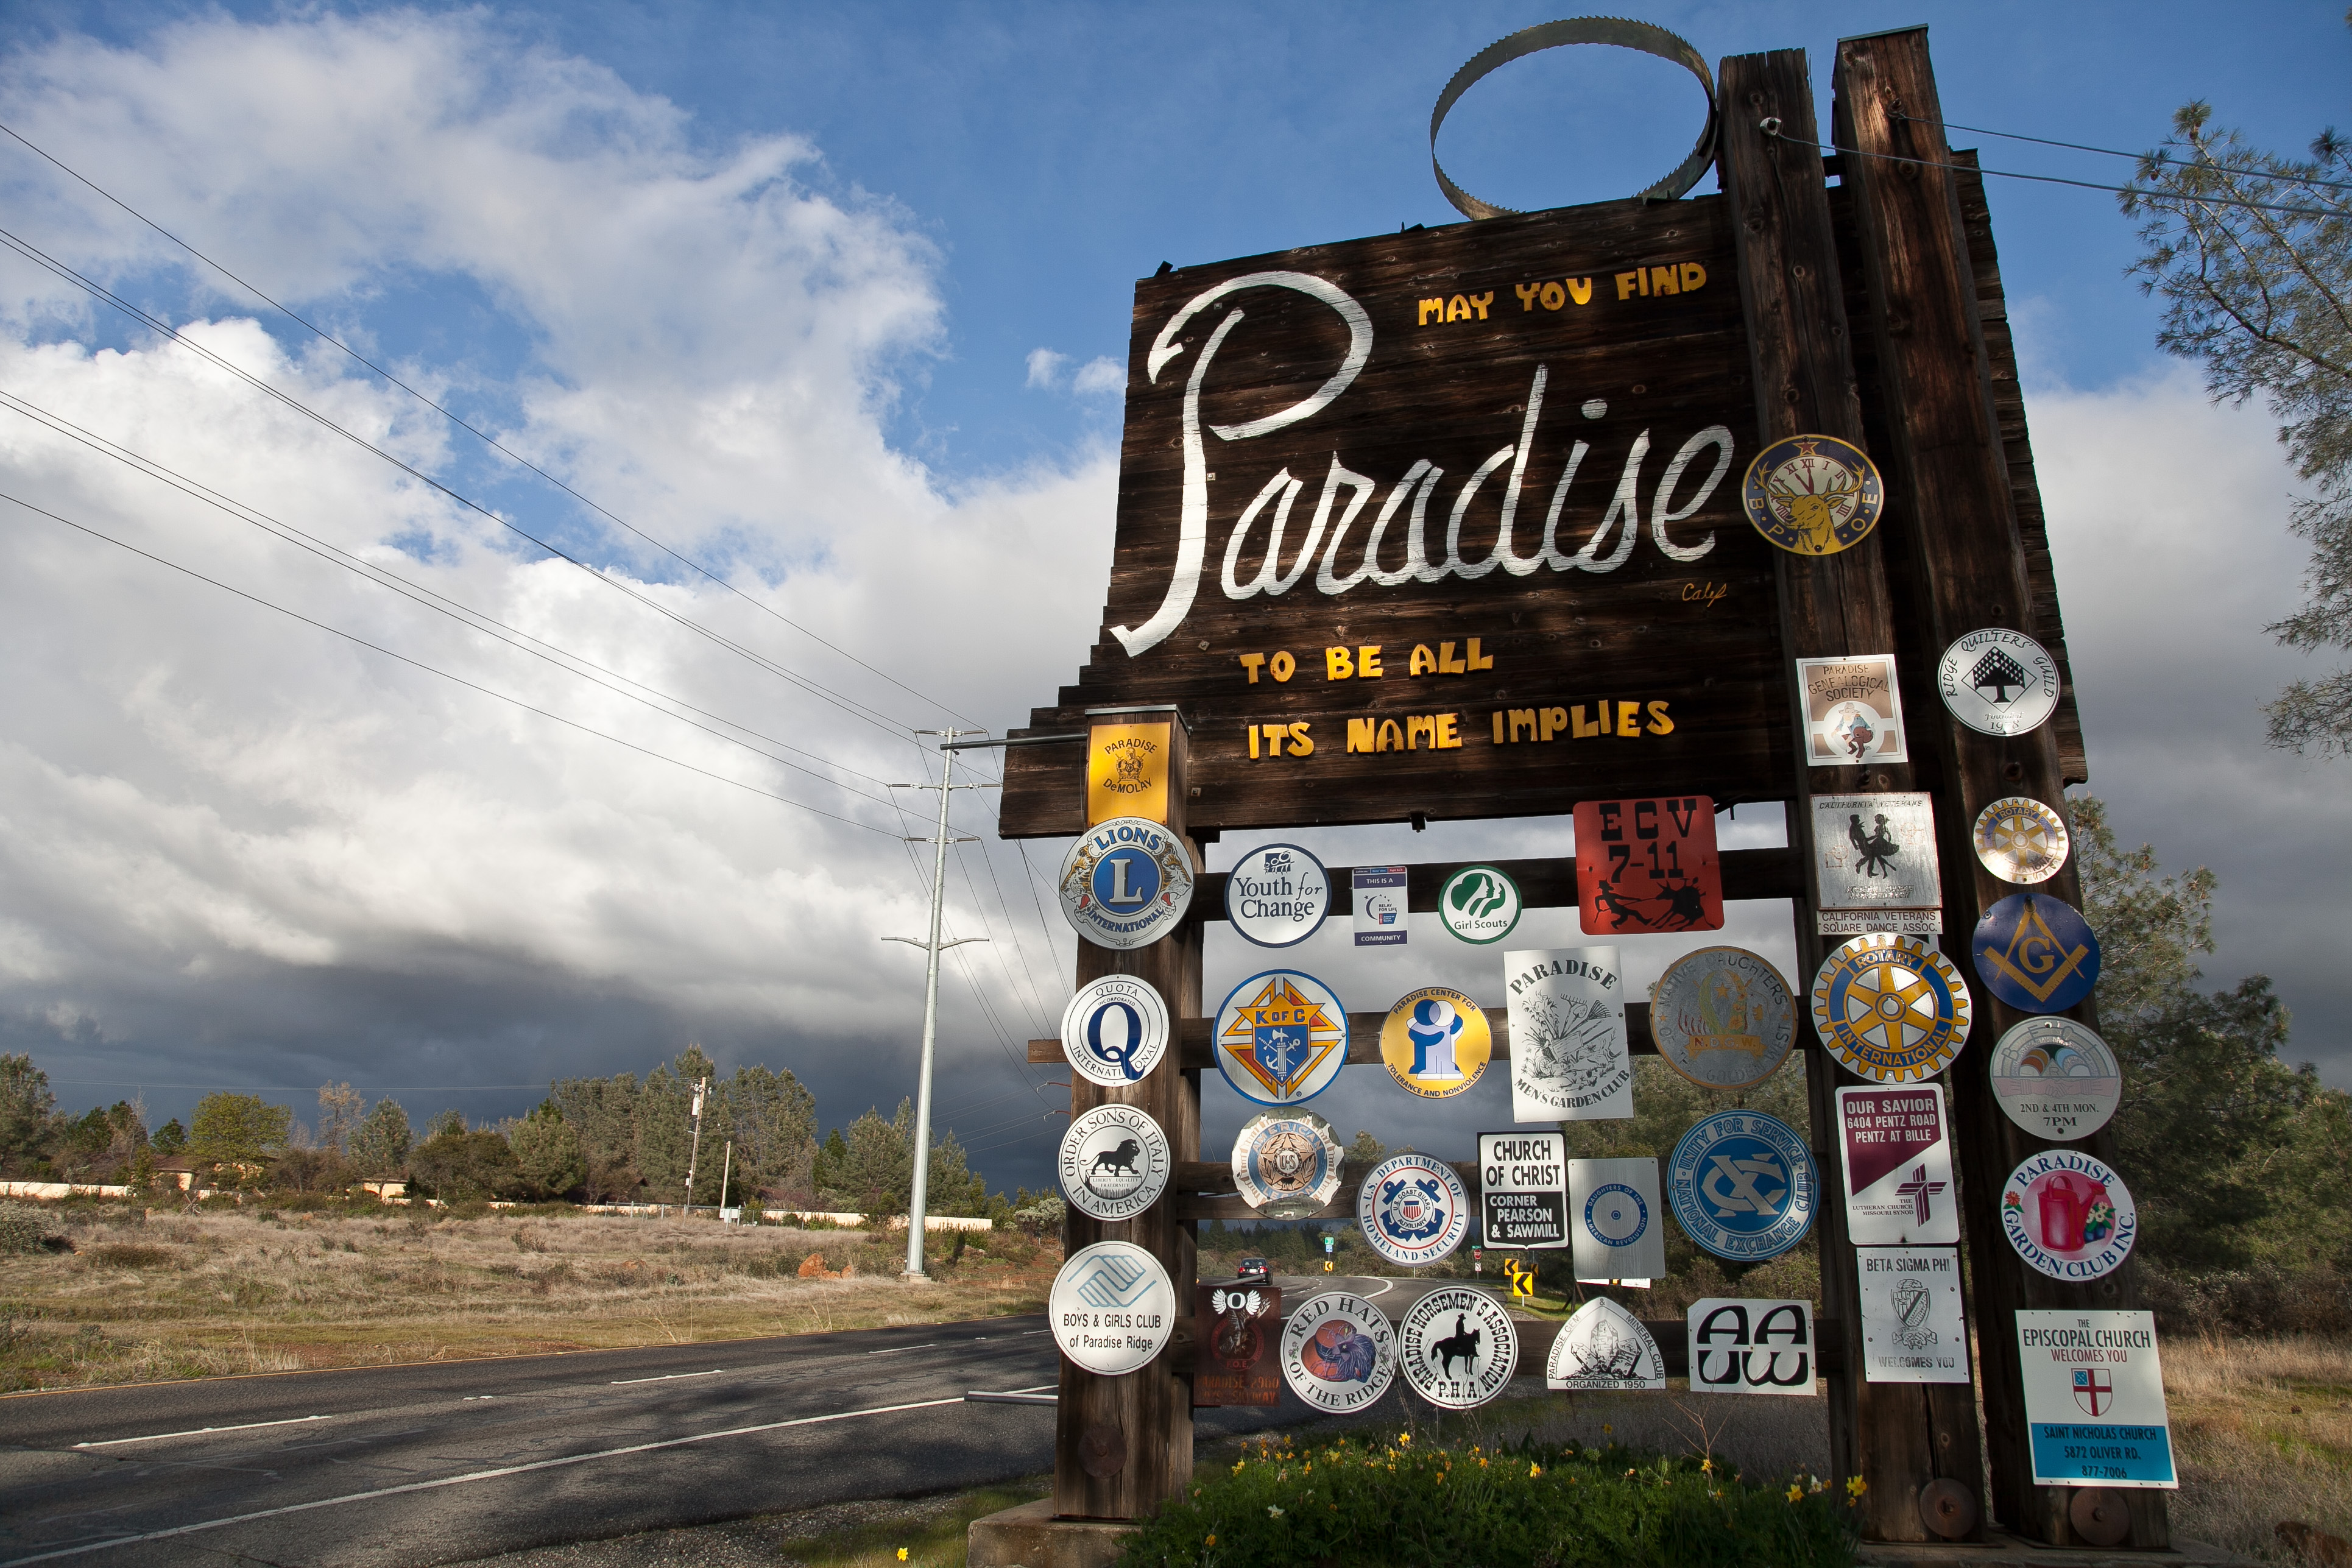 The welcome sign for Paradise California.